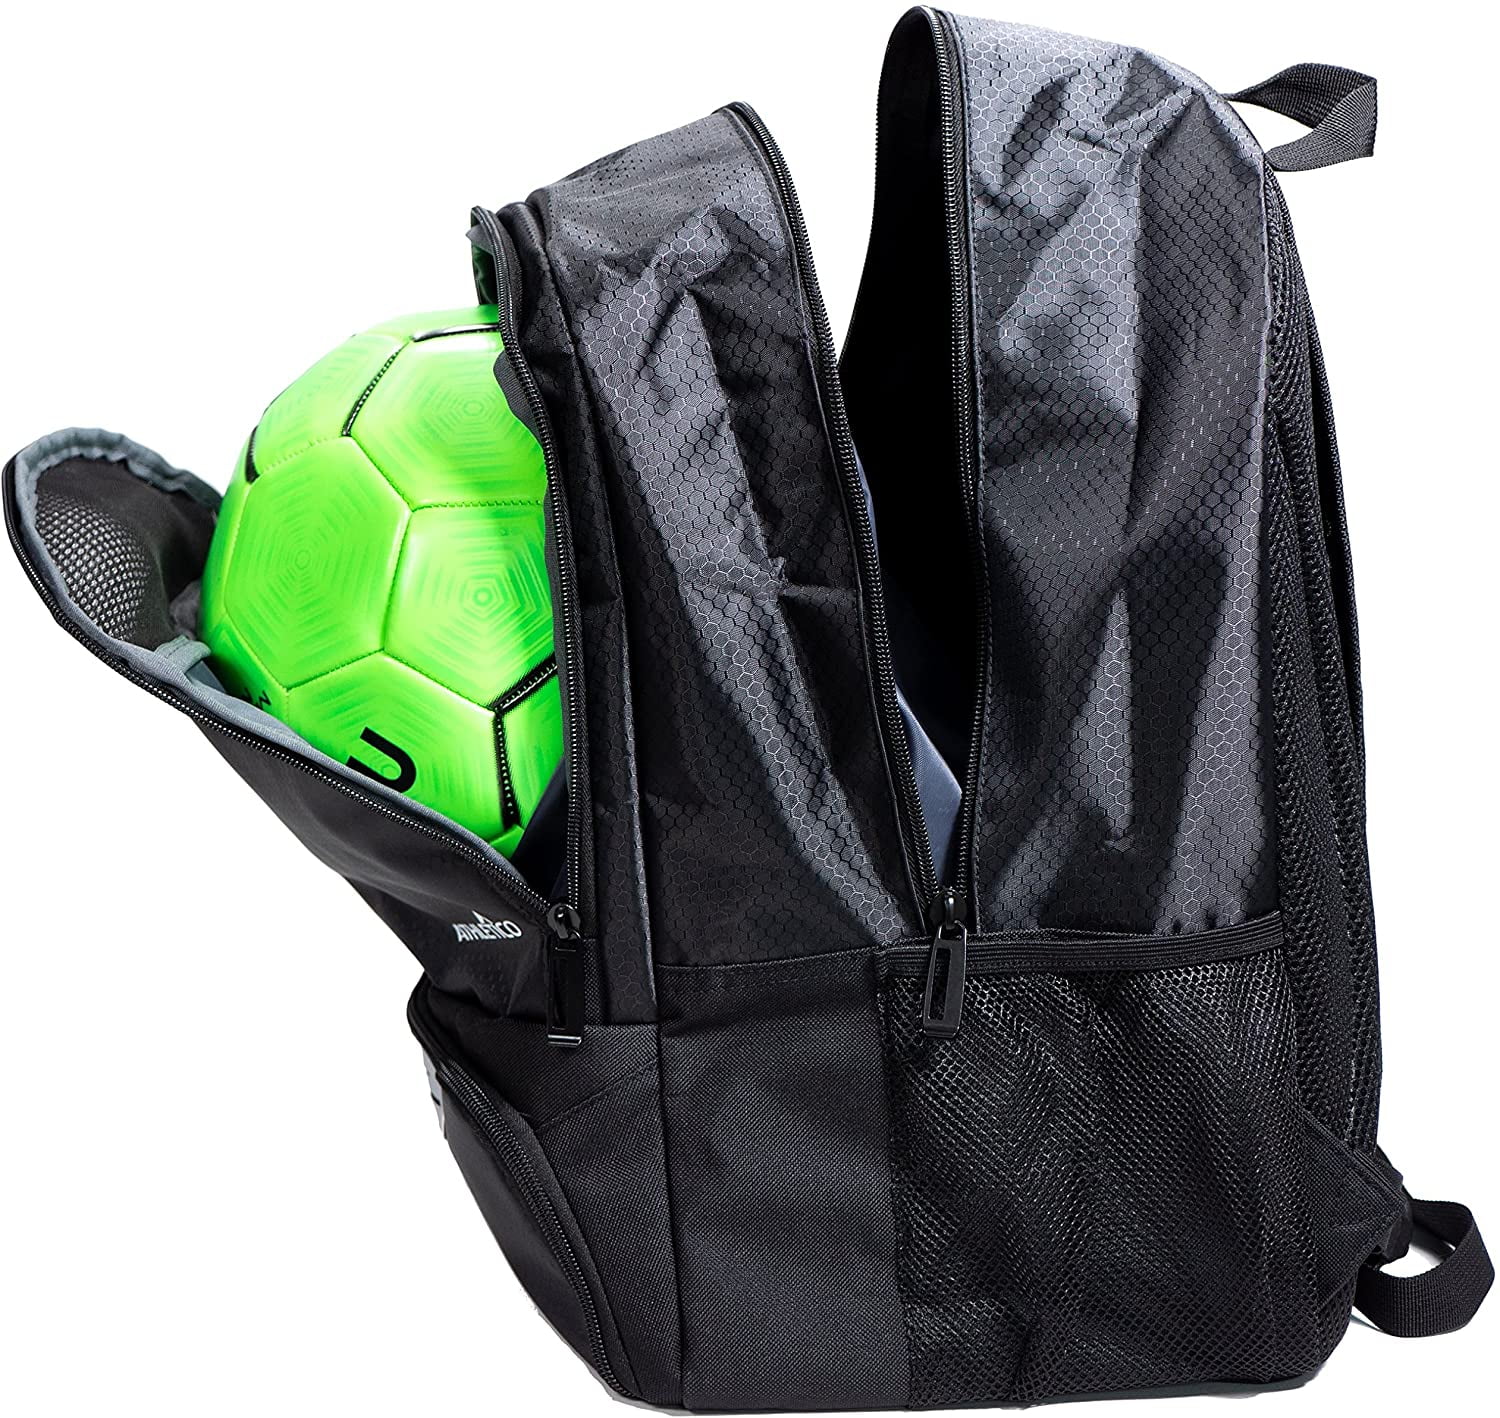 EULANT Soccer Bag Black Backpack for Soccer Baskestball Volleyball Football Handball Yoga Gym Waterproof Foldable Sports Sackpack with Shoes & Ball Holder Compartment for Youth Adults 